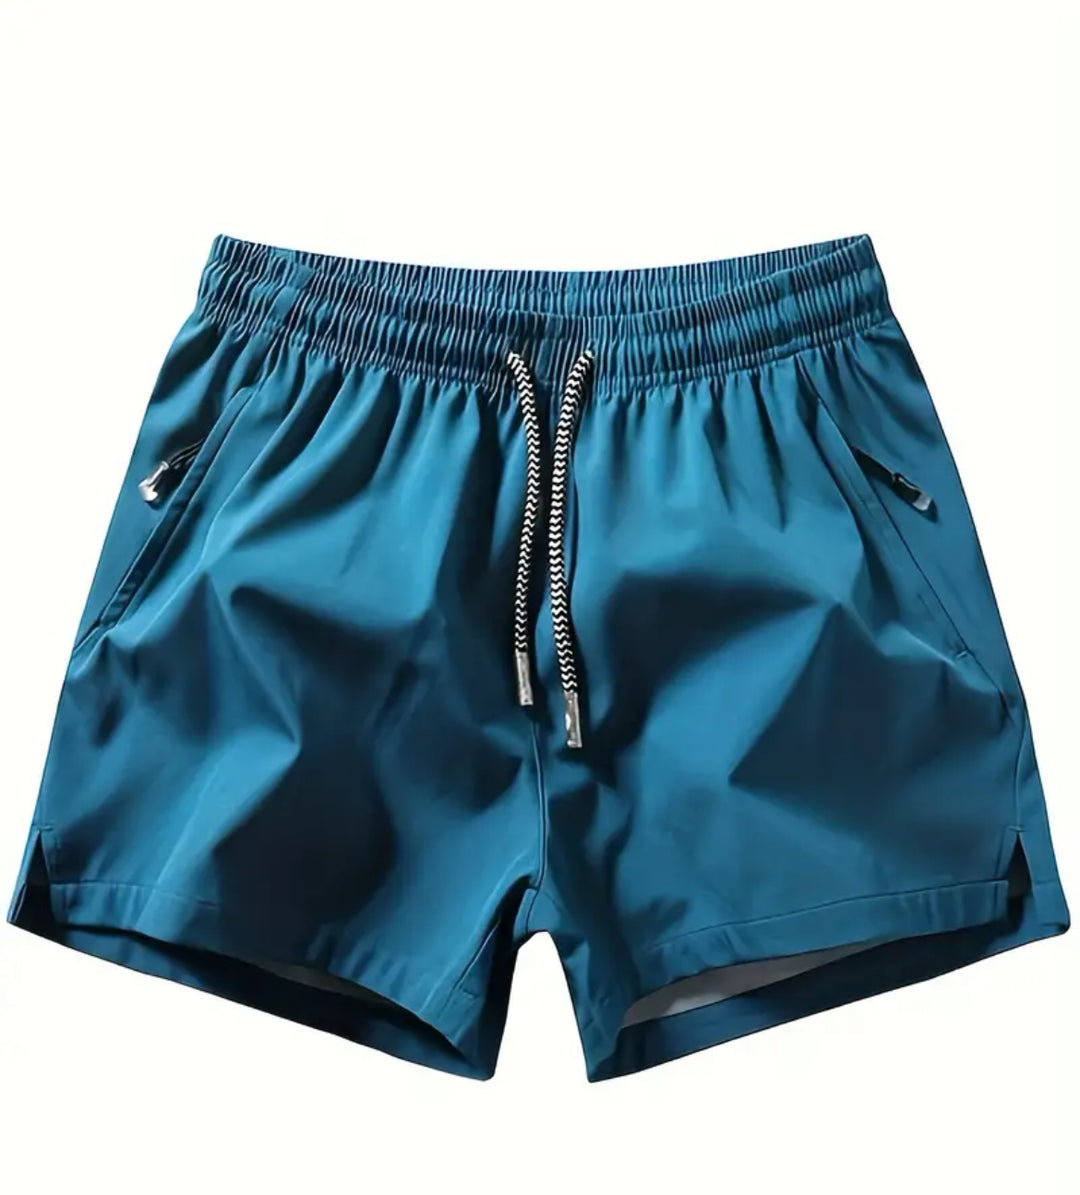 Quick Dry active shorts for men